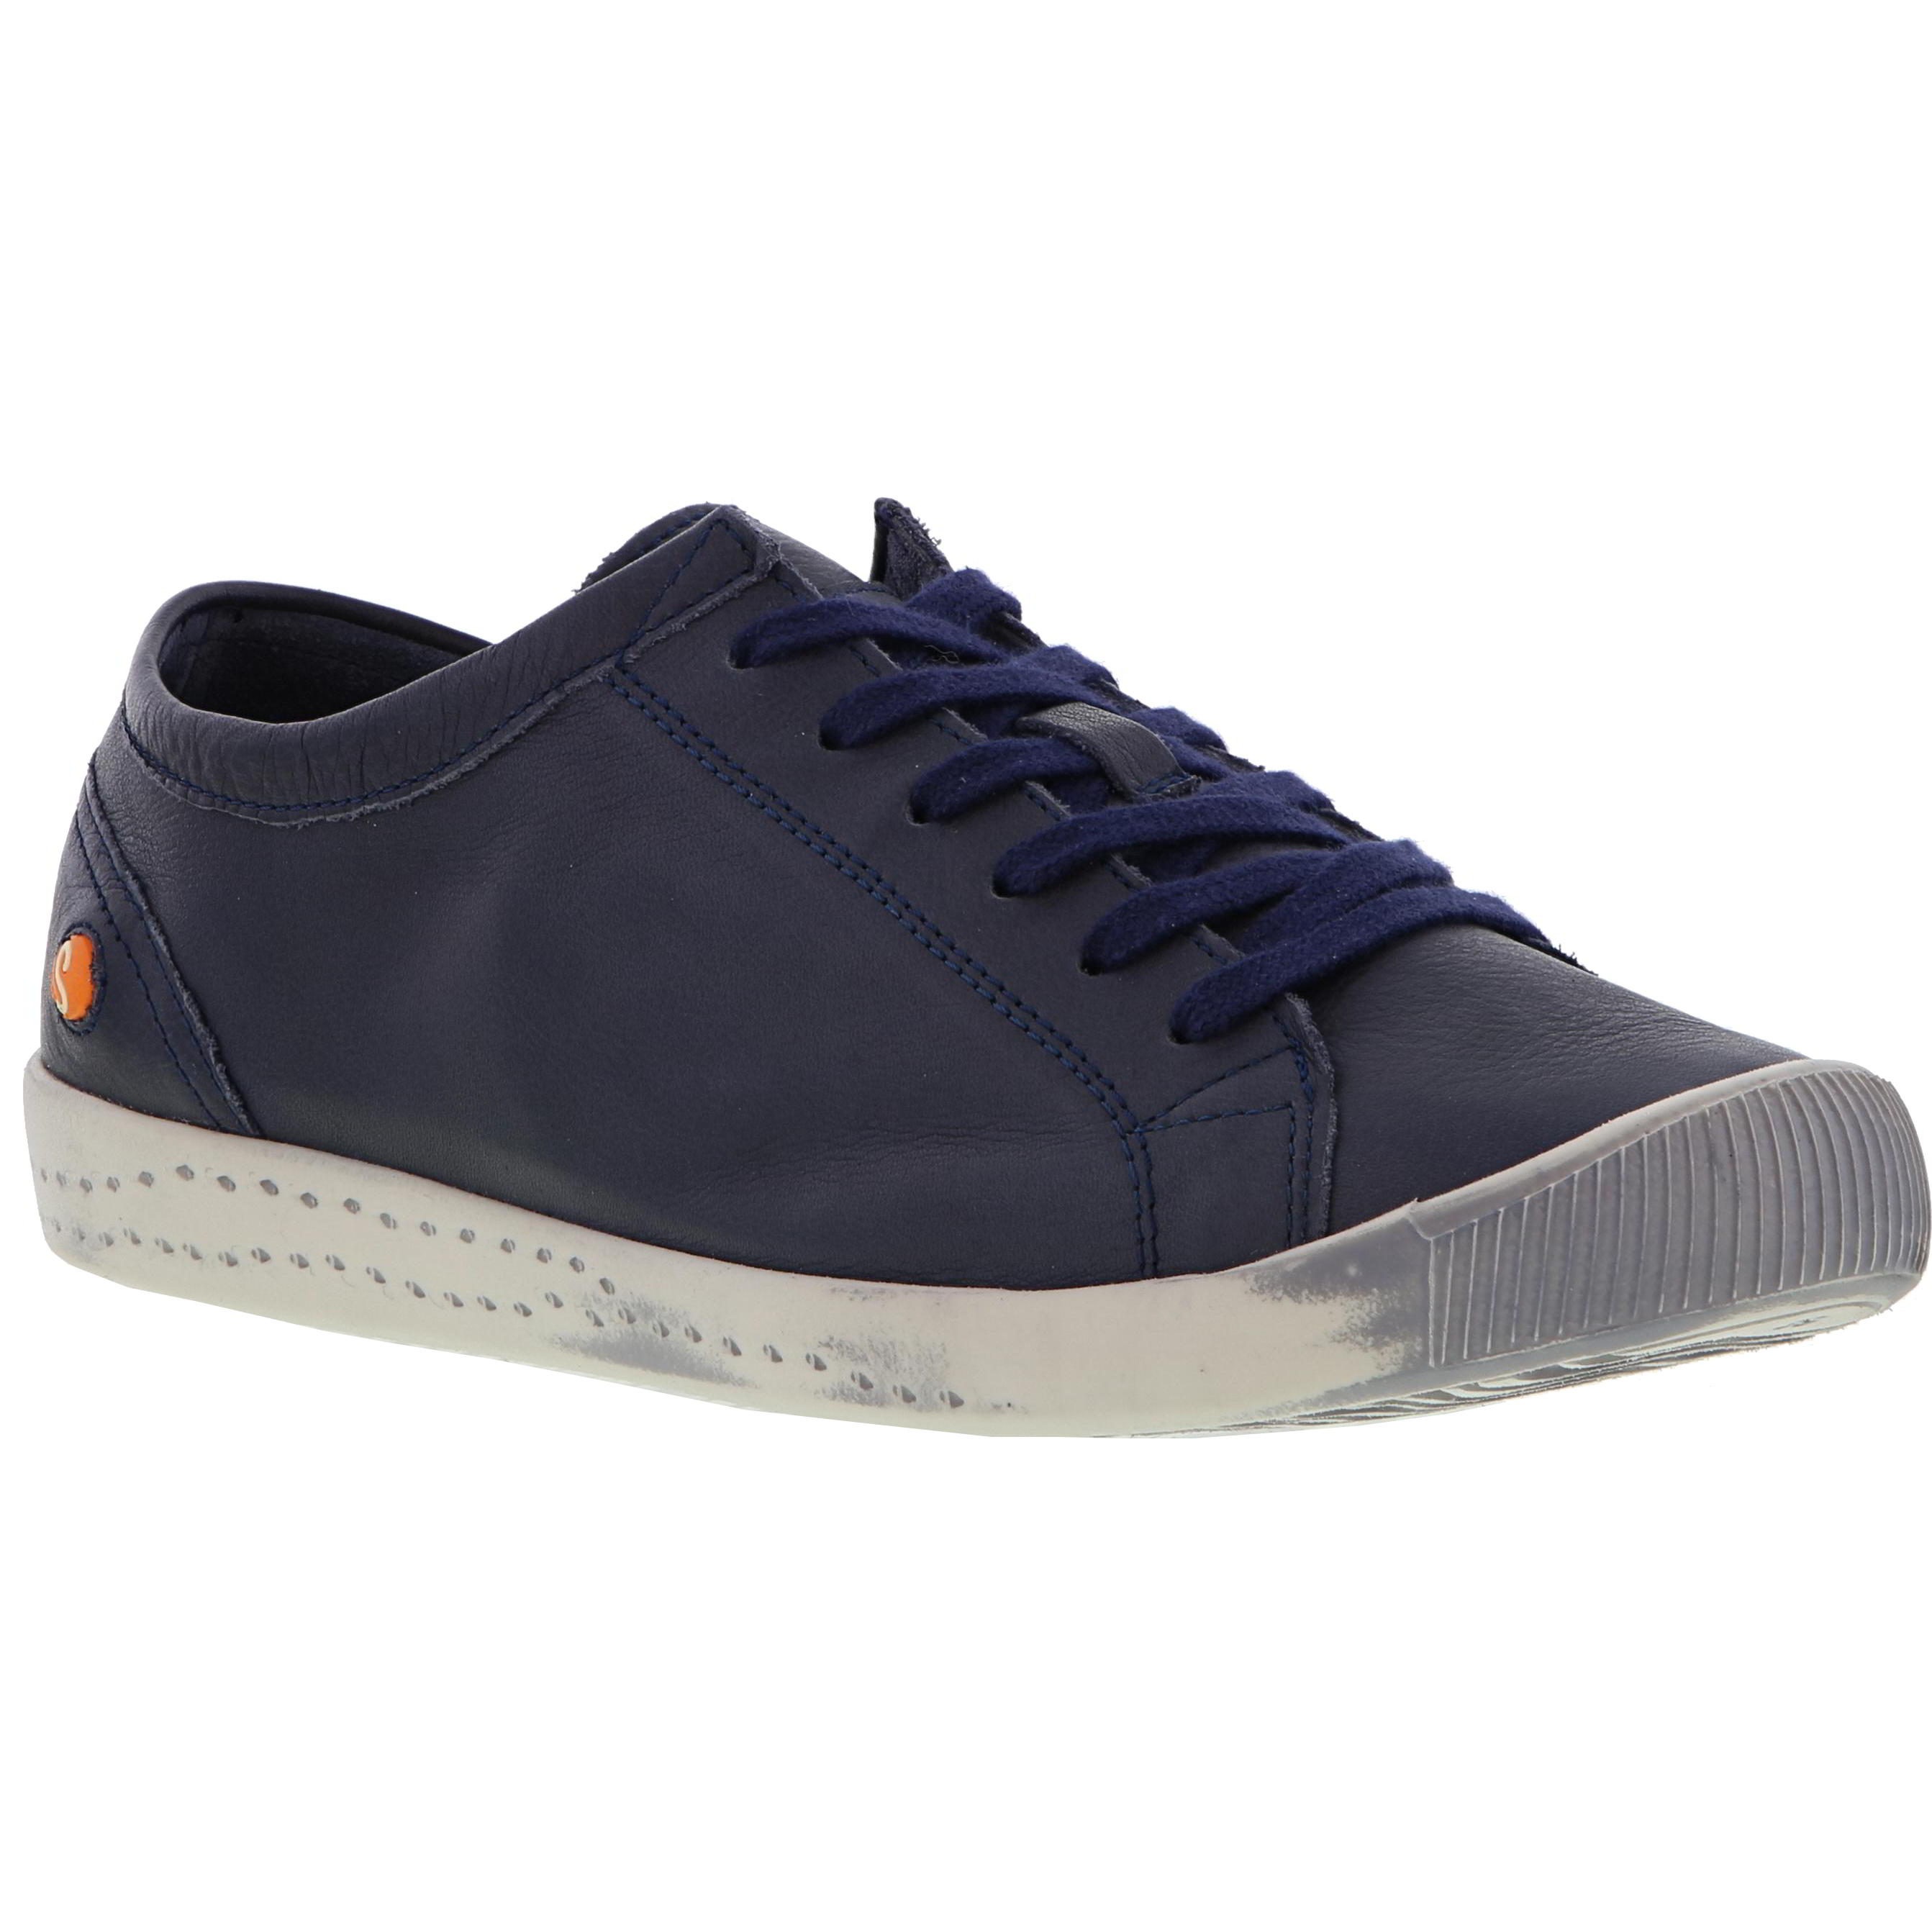 Softinos by Fly London Women's Isla Leather Trainers Shoes - Navy Smooth - UK 7 / EU 40